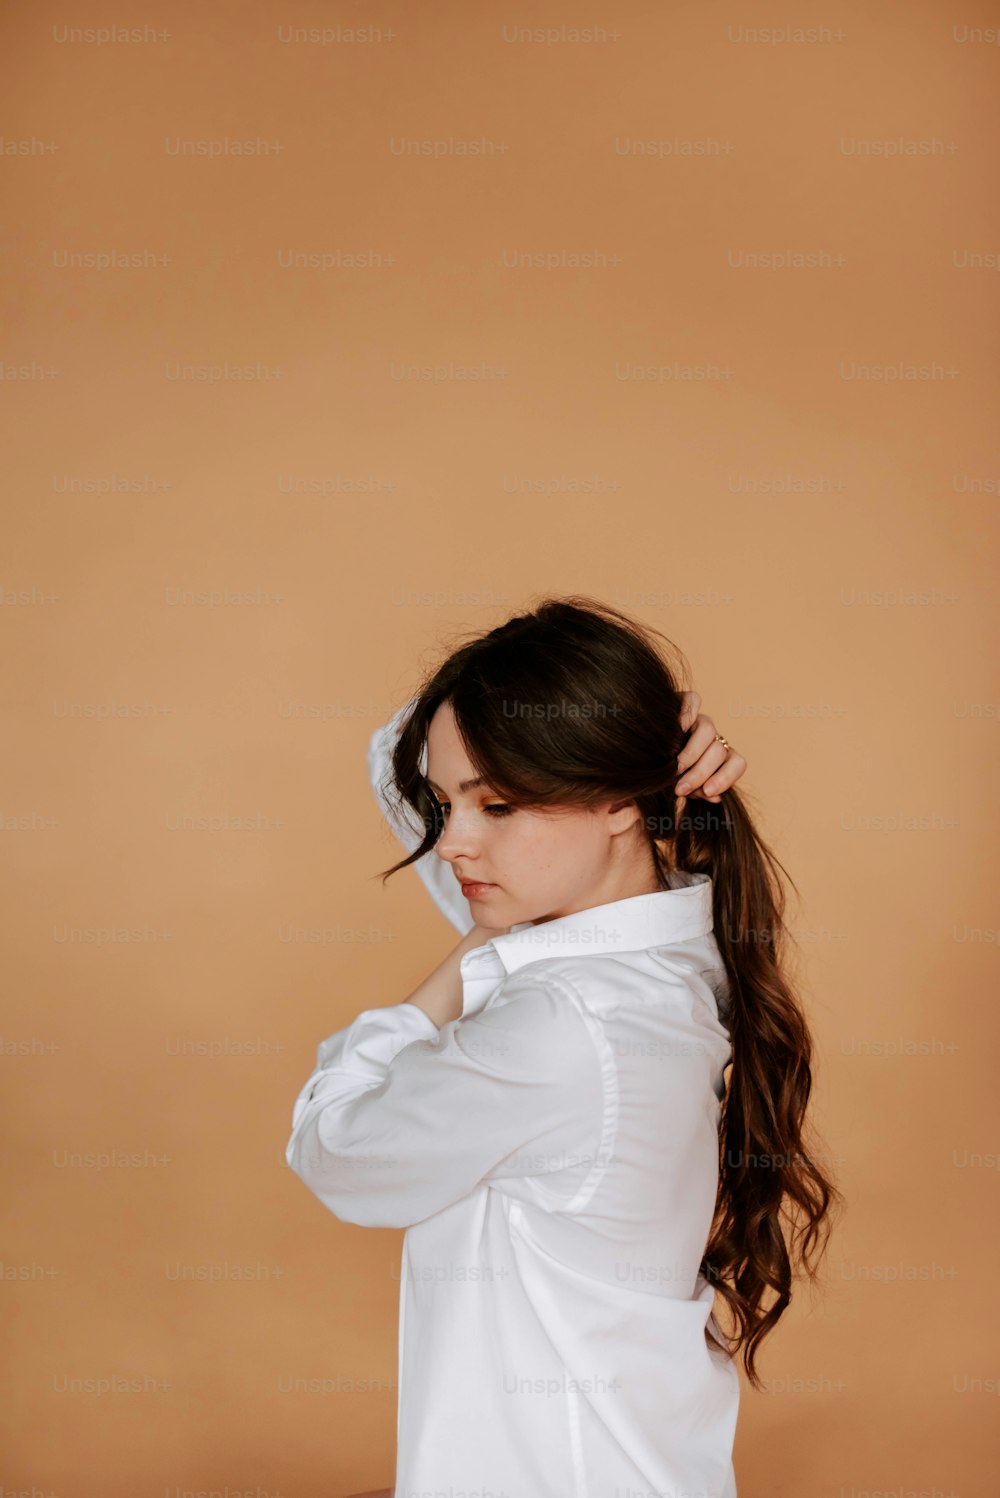 a woman with long hair wearing a white shirt